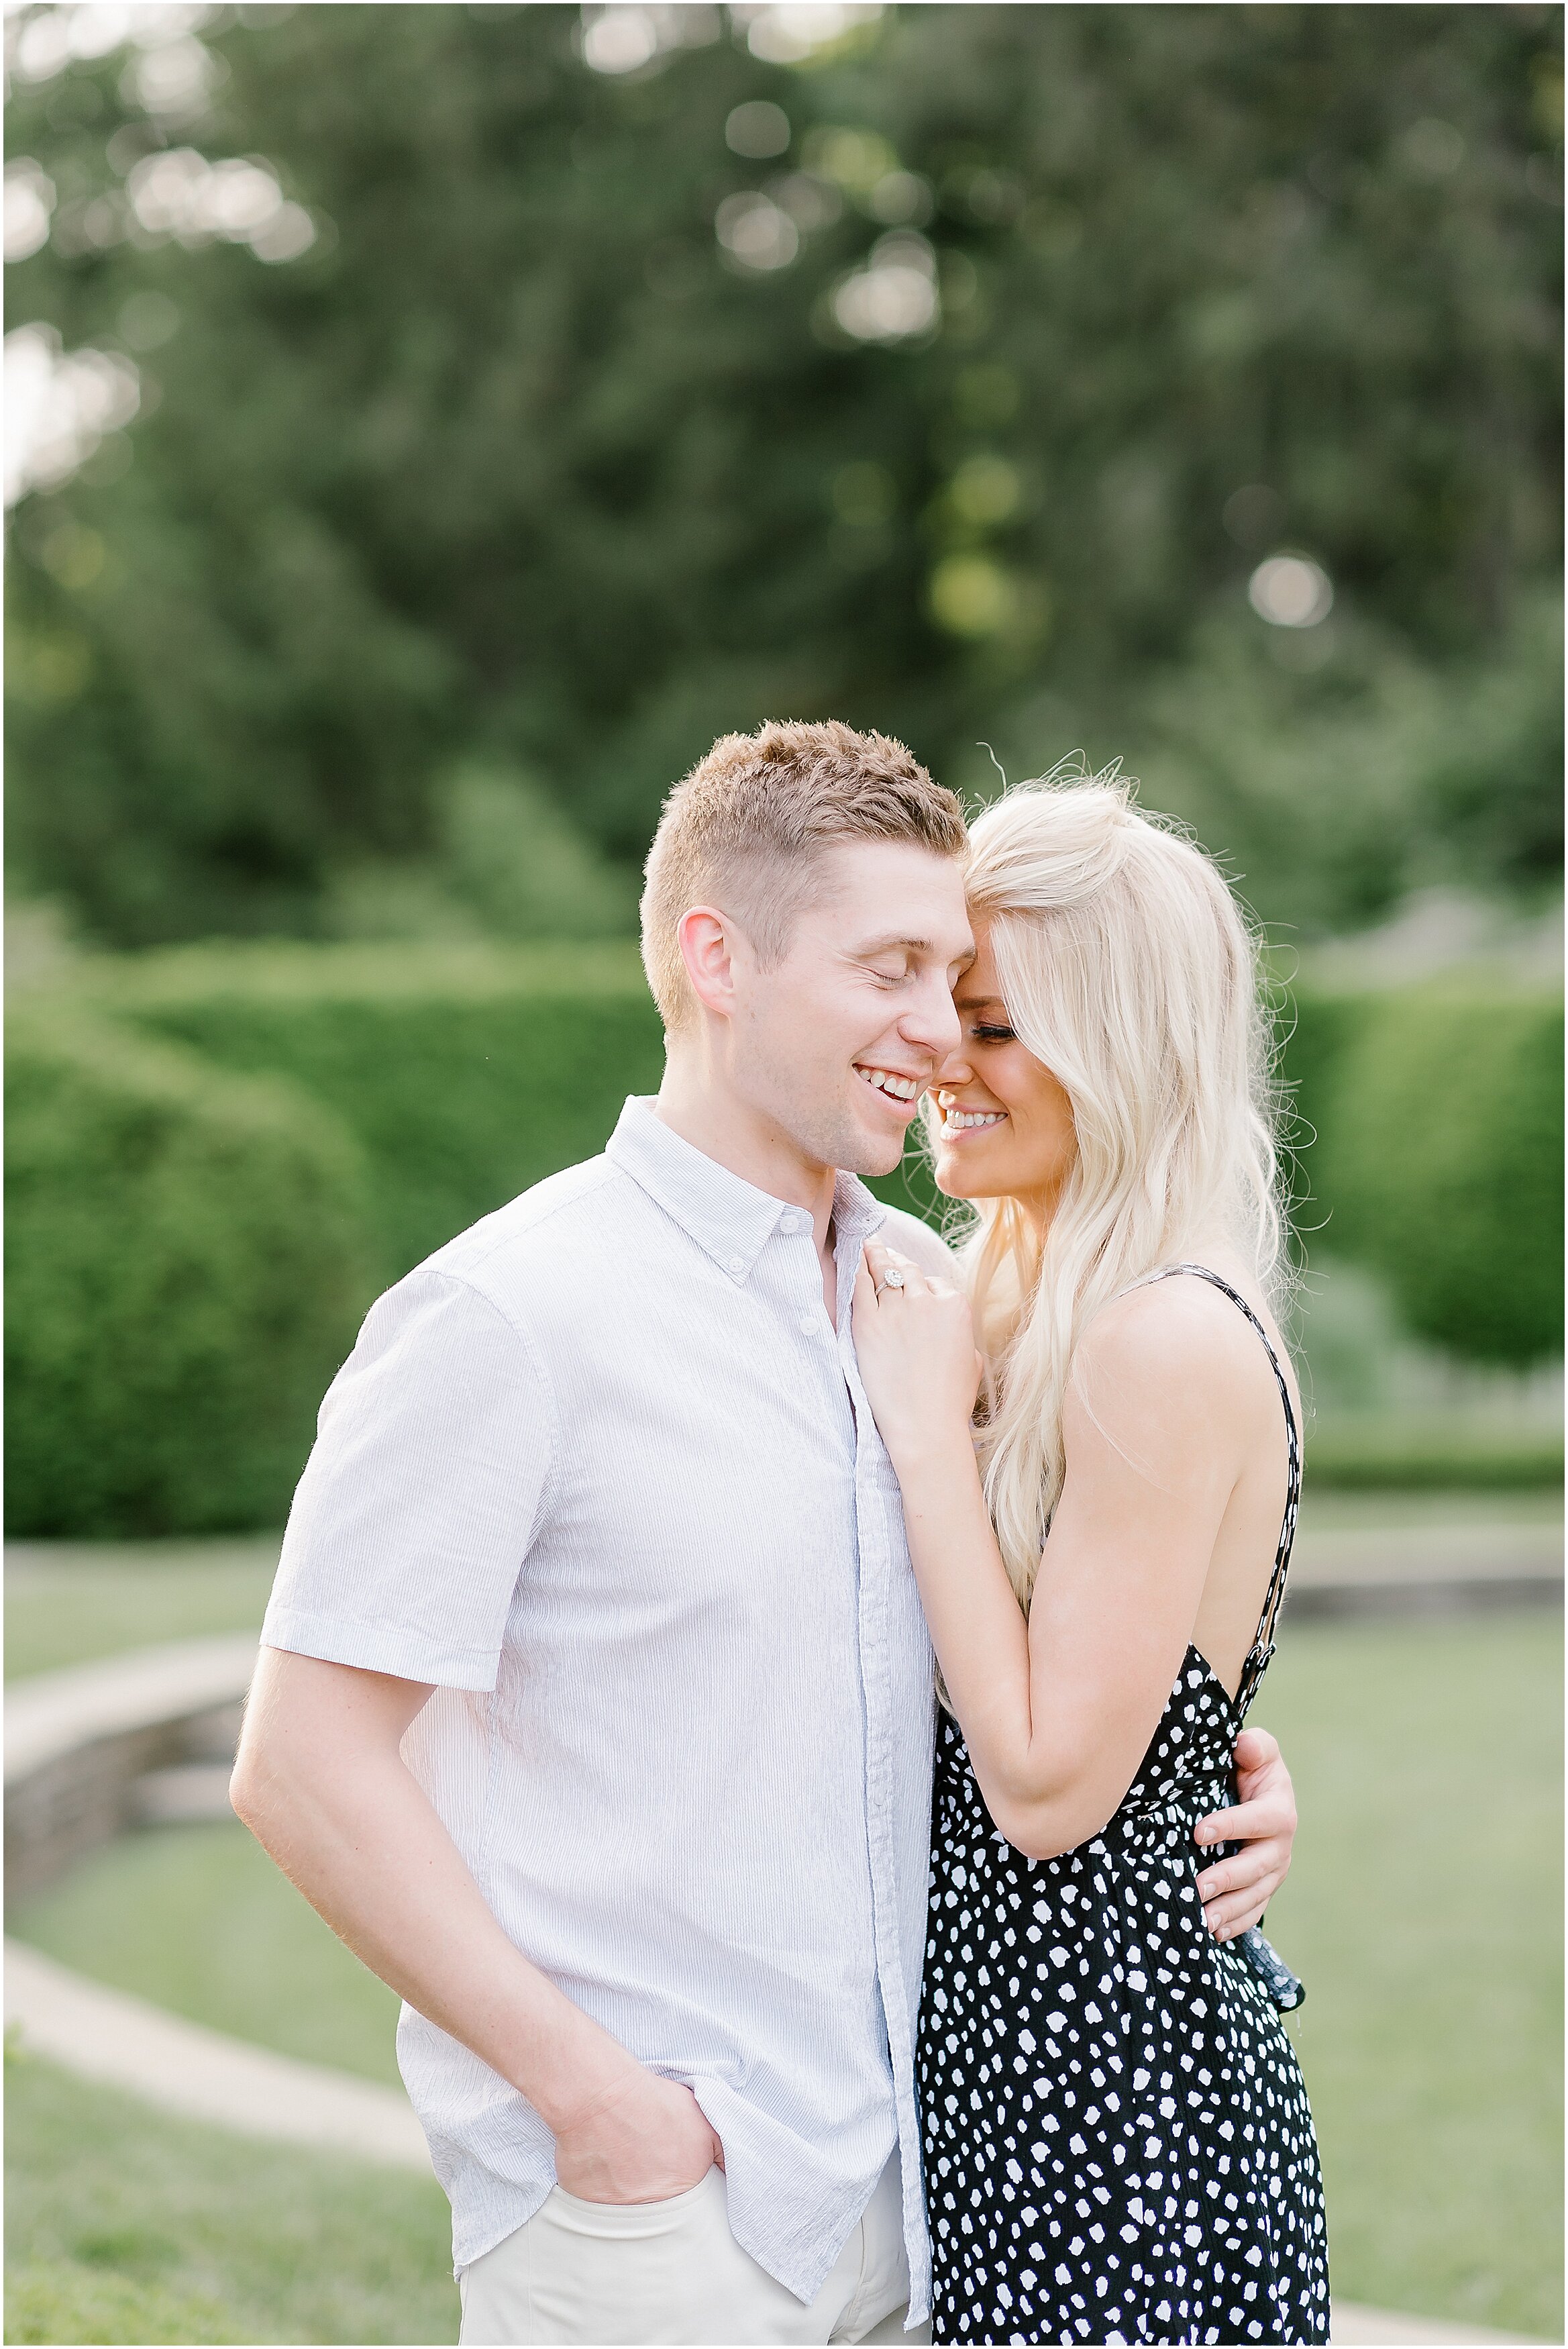 Rebecca_Shehorn_Photography_Nicholette and Michael Eng-248_Newfields Engagement Indianapolis Wedding Photographer.jpg